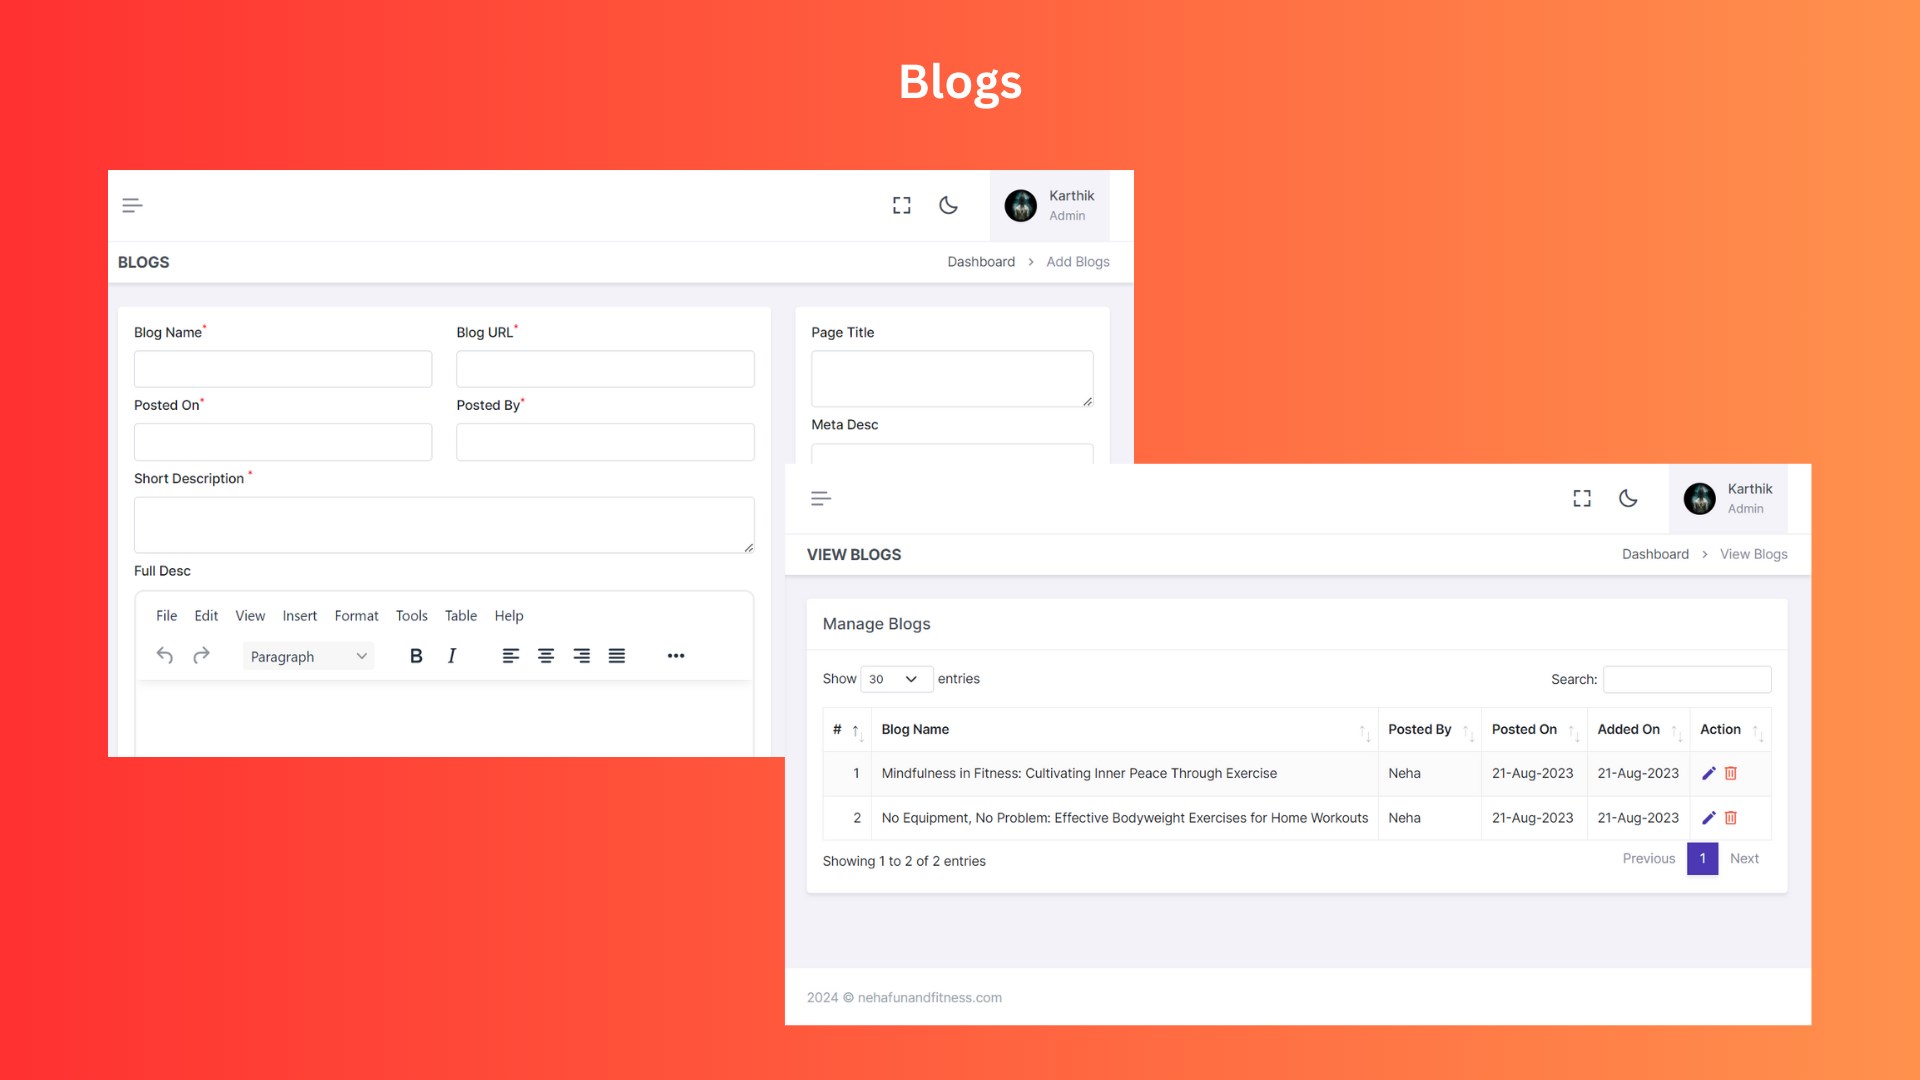 Feature to manage blog posts with an SEO enhancement option for updating page titles, meta descriptions, and meta titles.